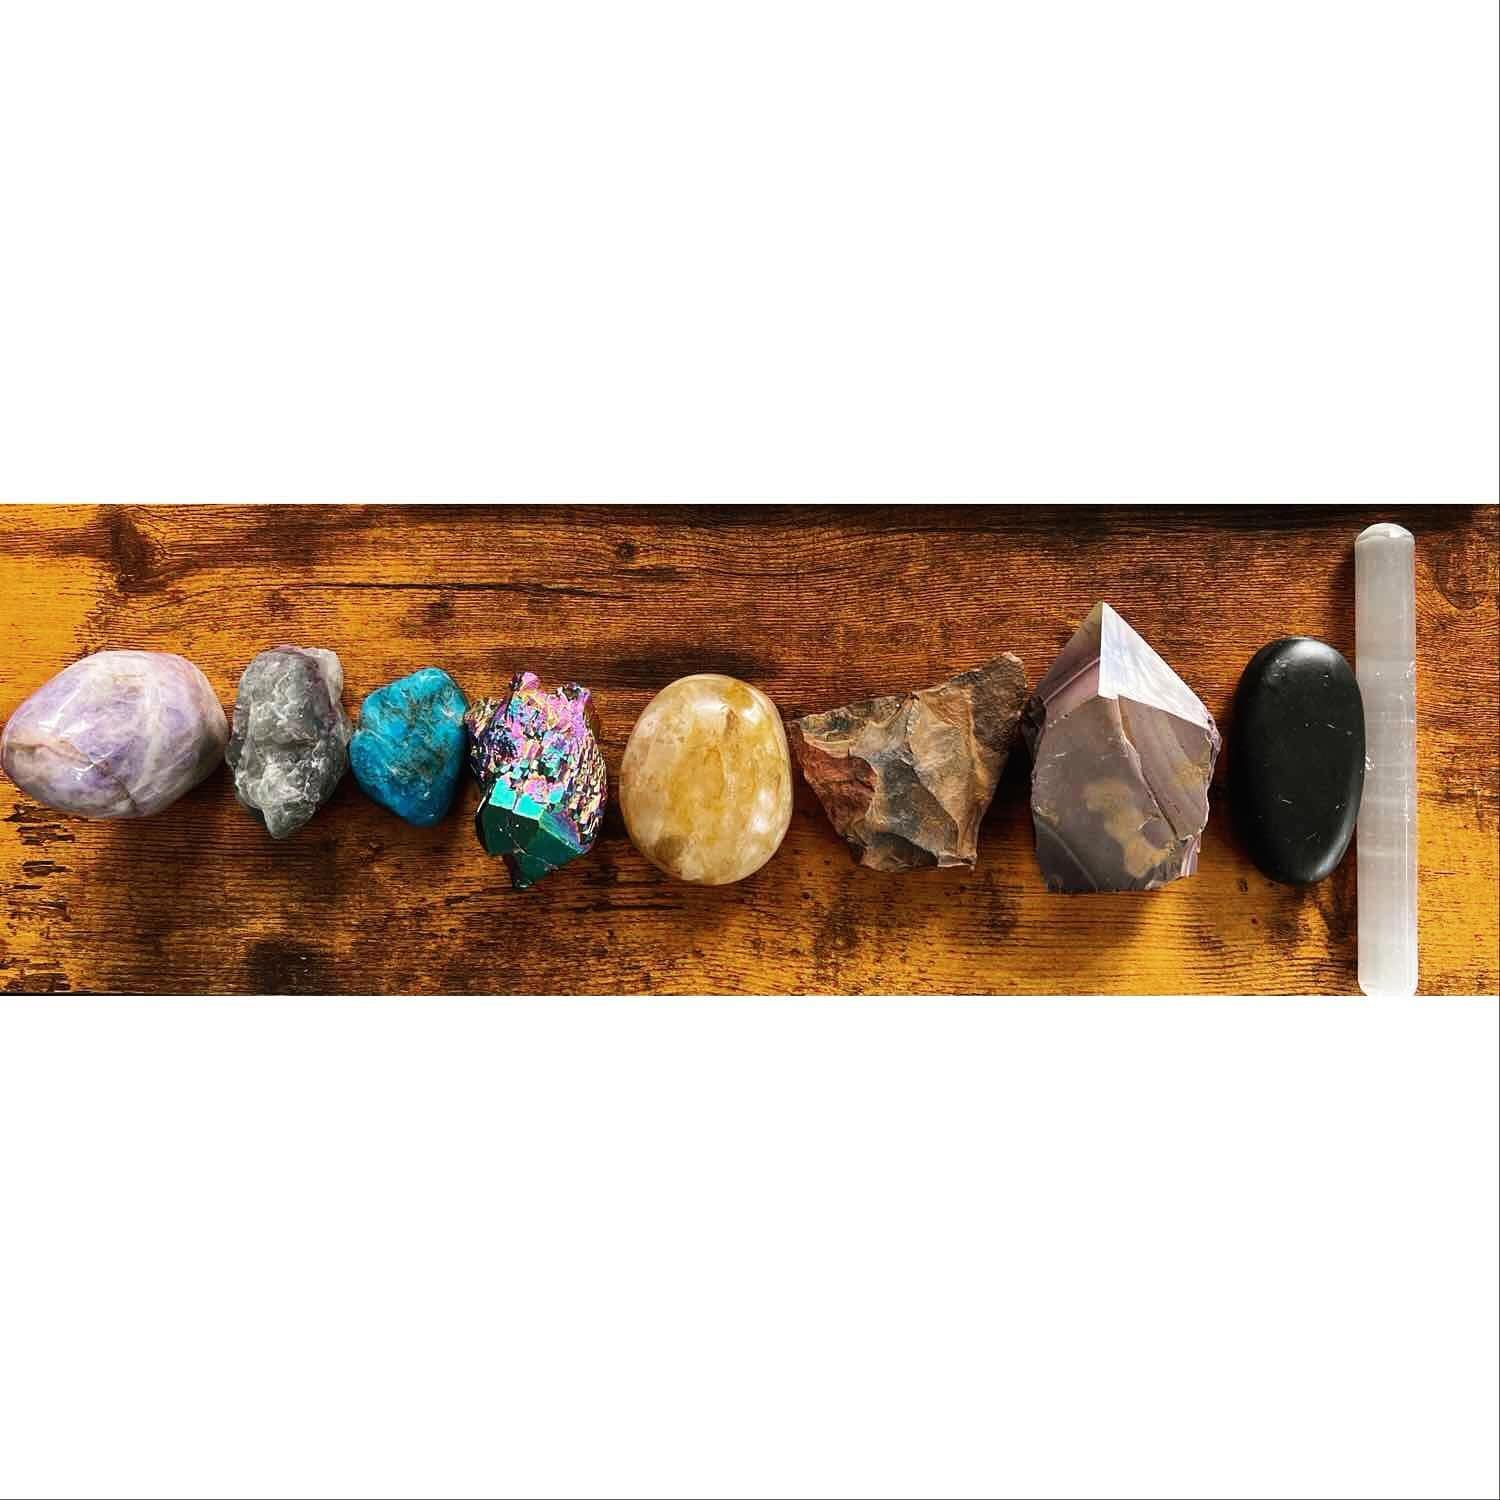 The crystal friends who came with me to the Empower Leadership Experience event yesterday. ❤️💜🩵 I worked with their energy during the crystal healing meditation. It was a truly exhilarating and amazing day!!! 

Which crystal is calling you today? 
